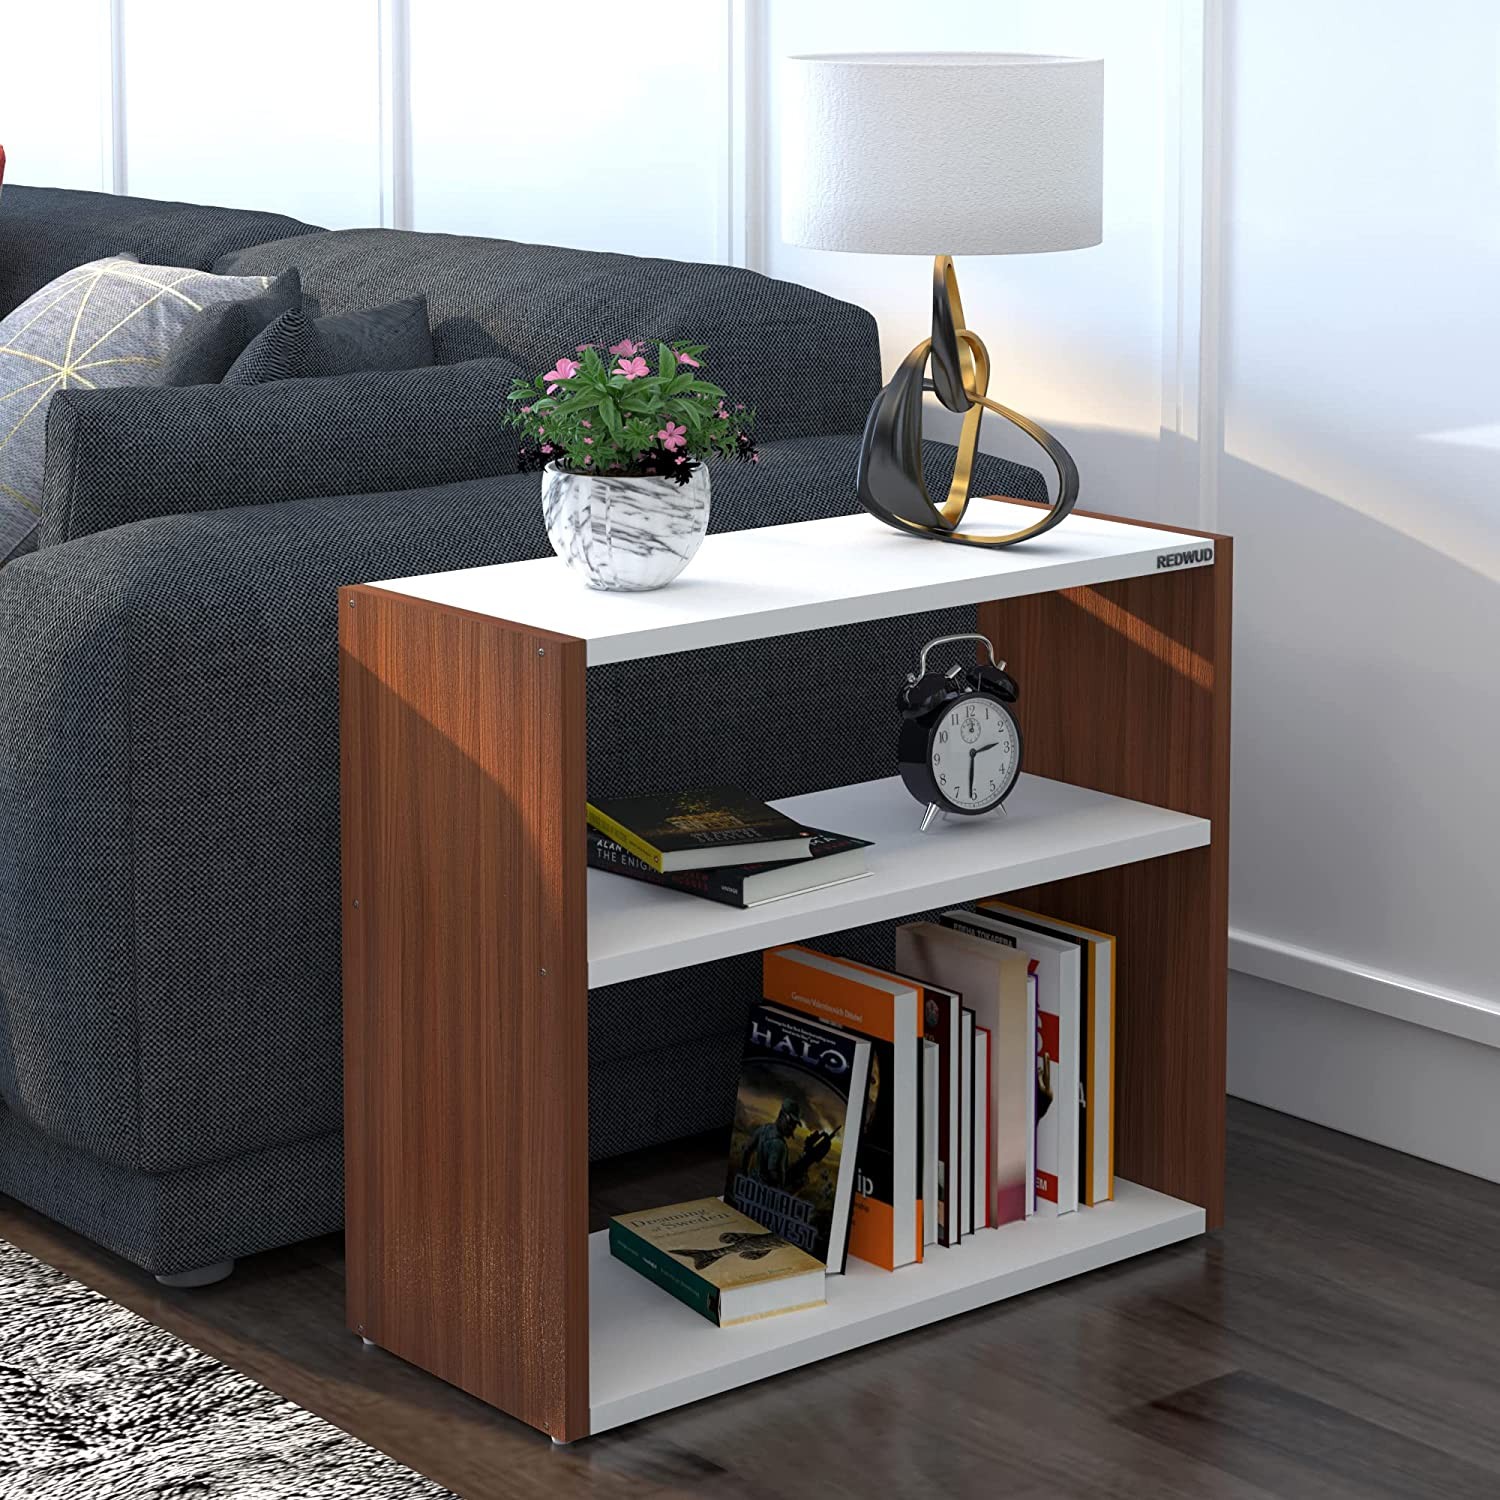 patricia-engineered-wood-bedside-table-end-table-walnut-white-rd-patricia-wntwt